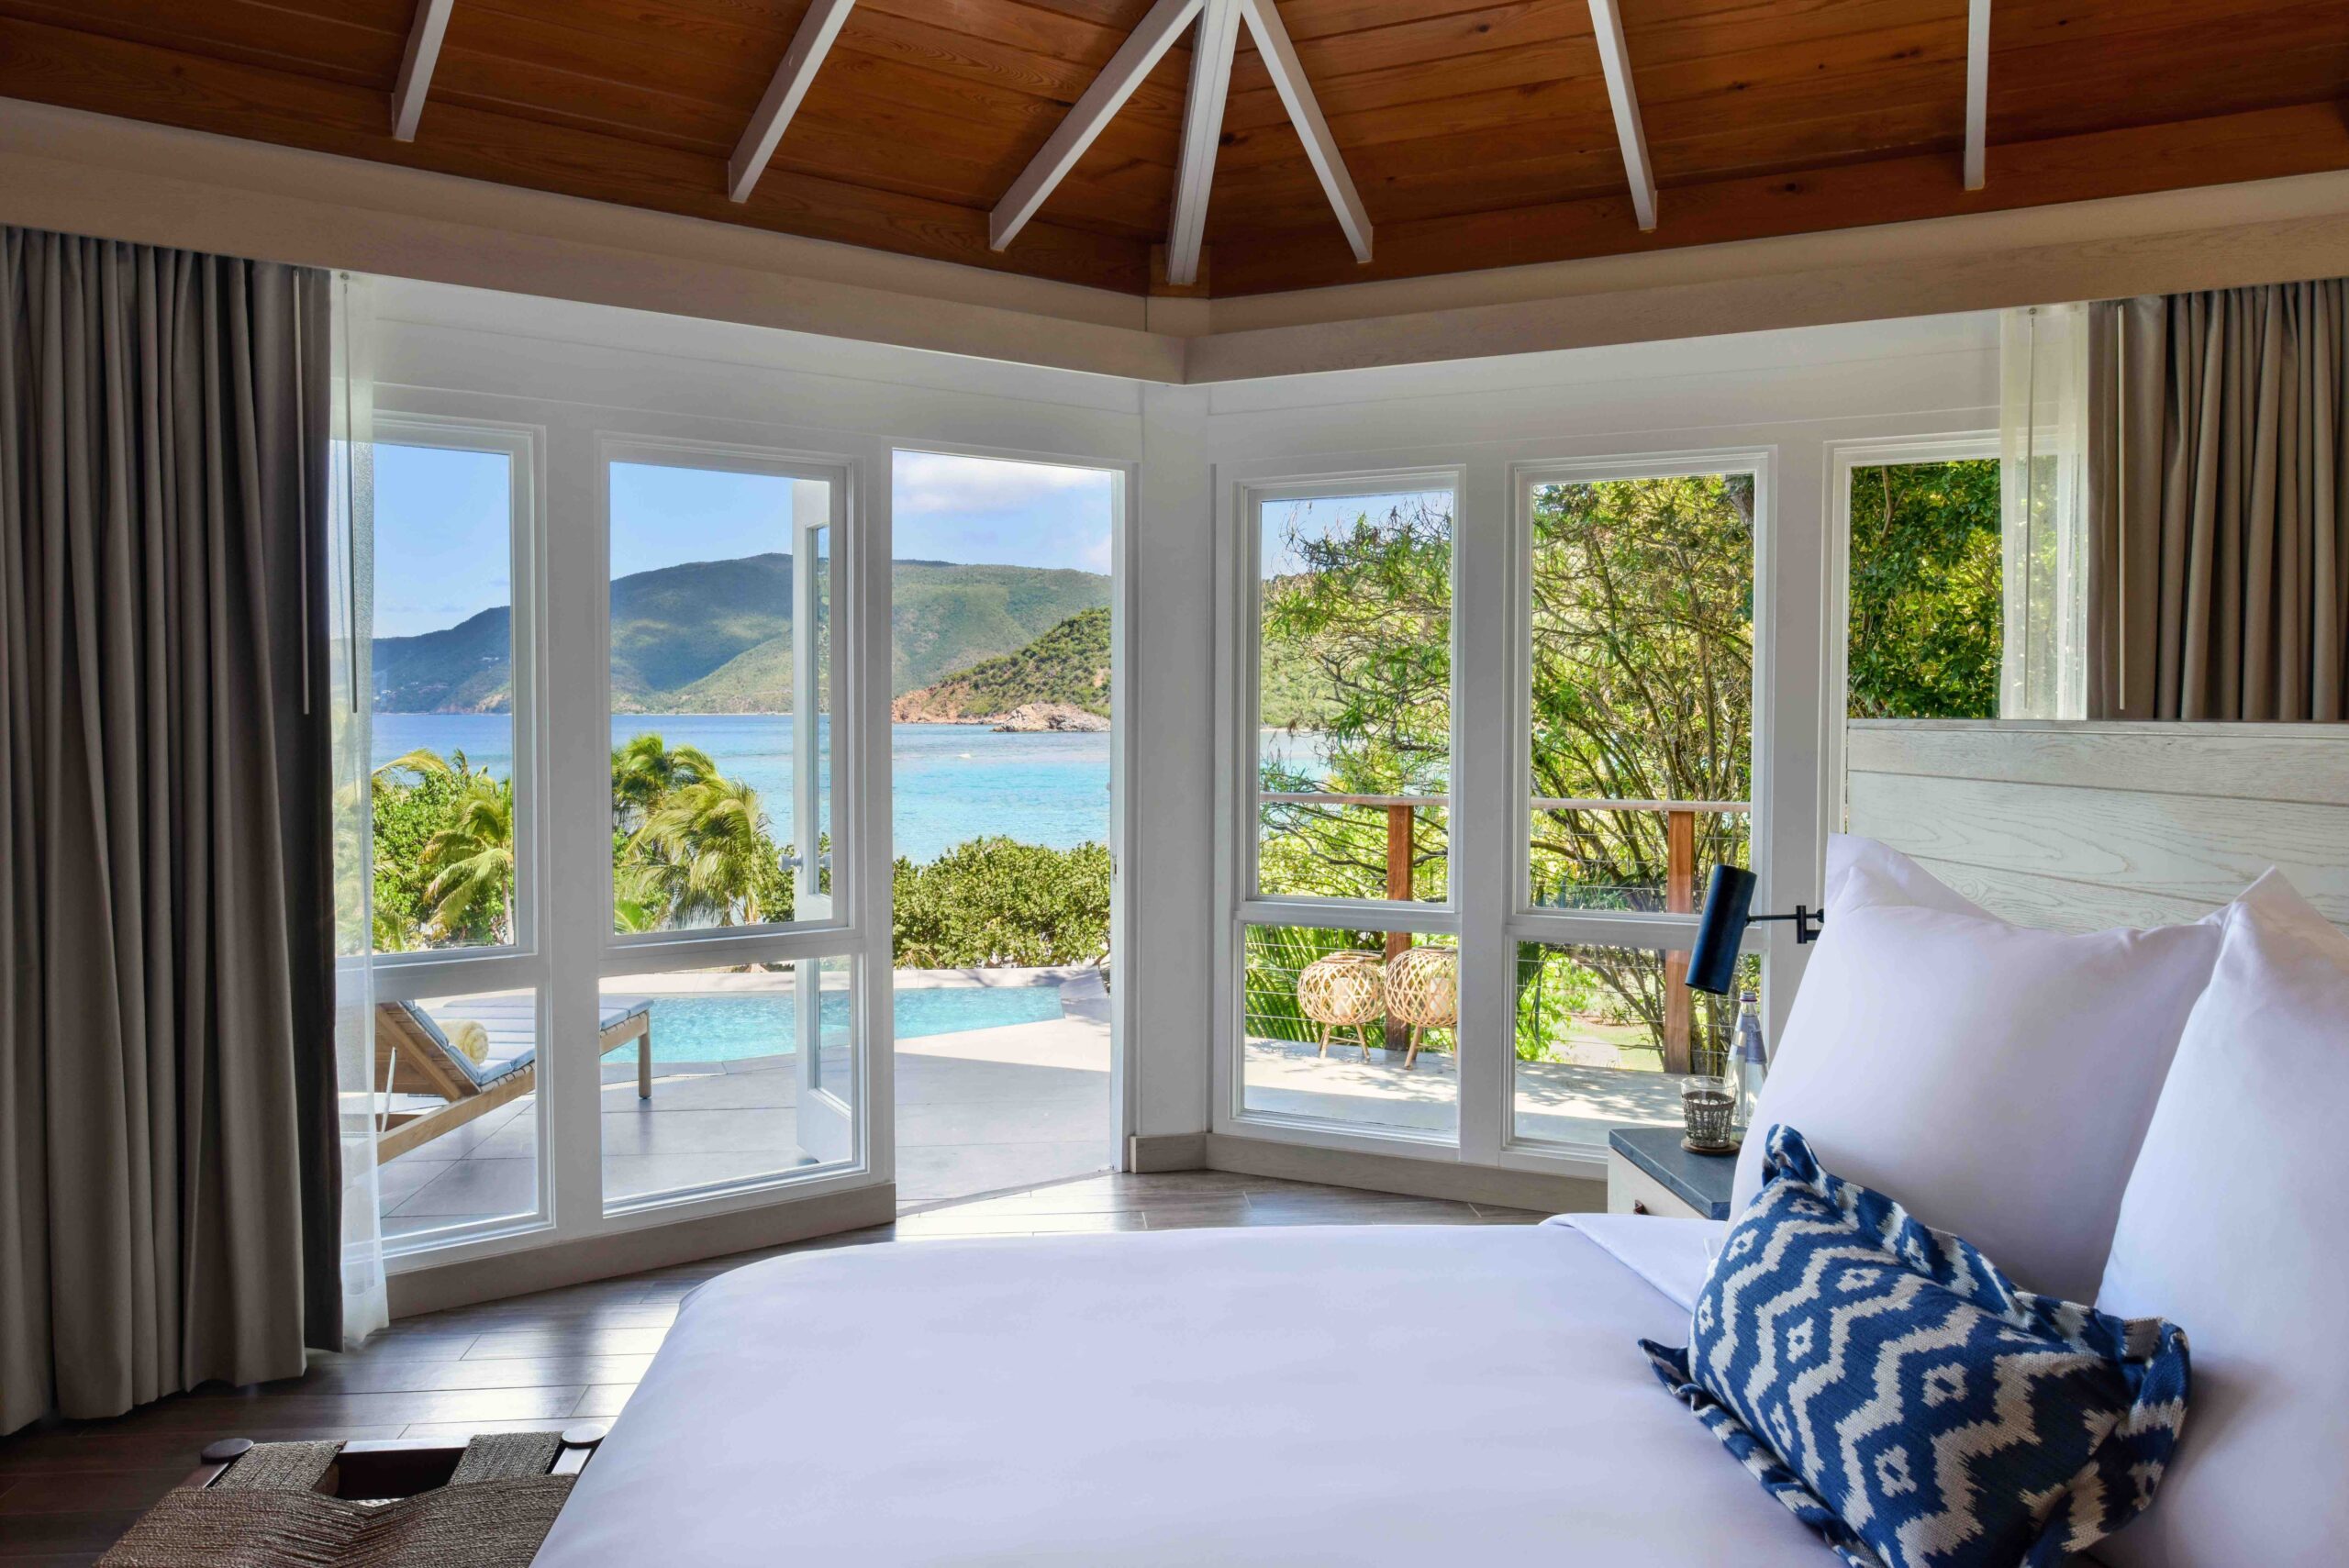 rosewood little dix bay, the best hotels given overnight accommodation